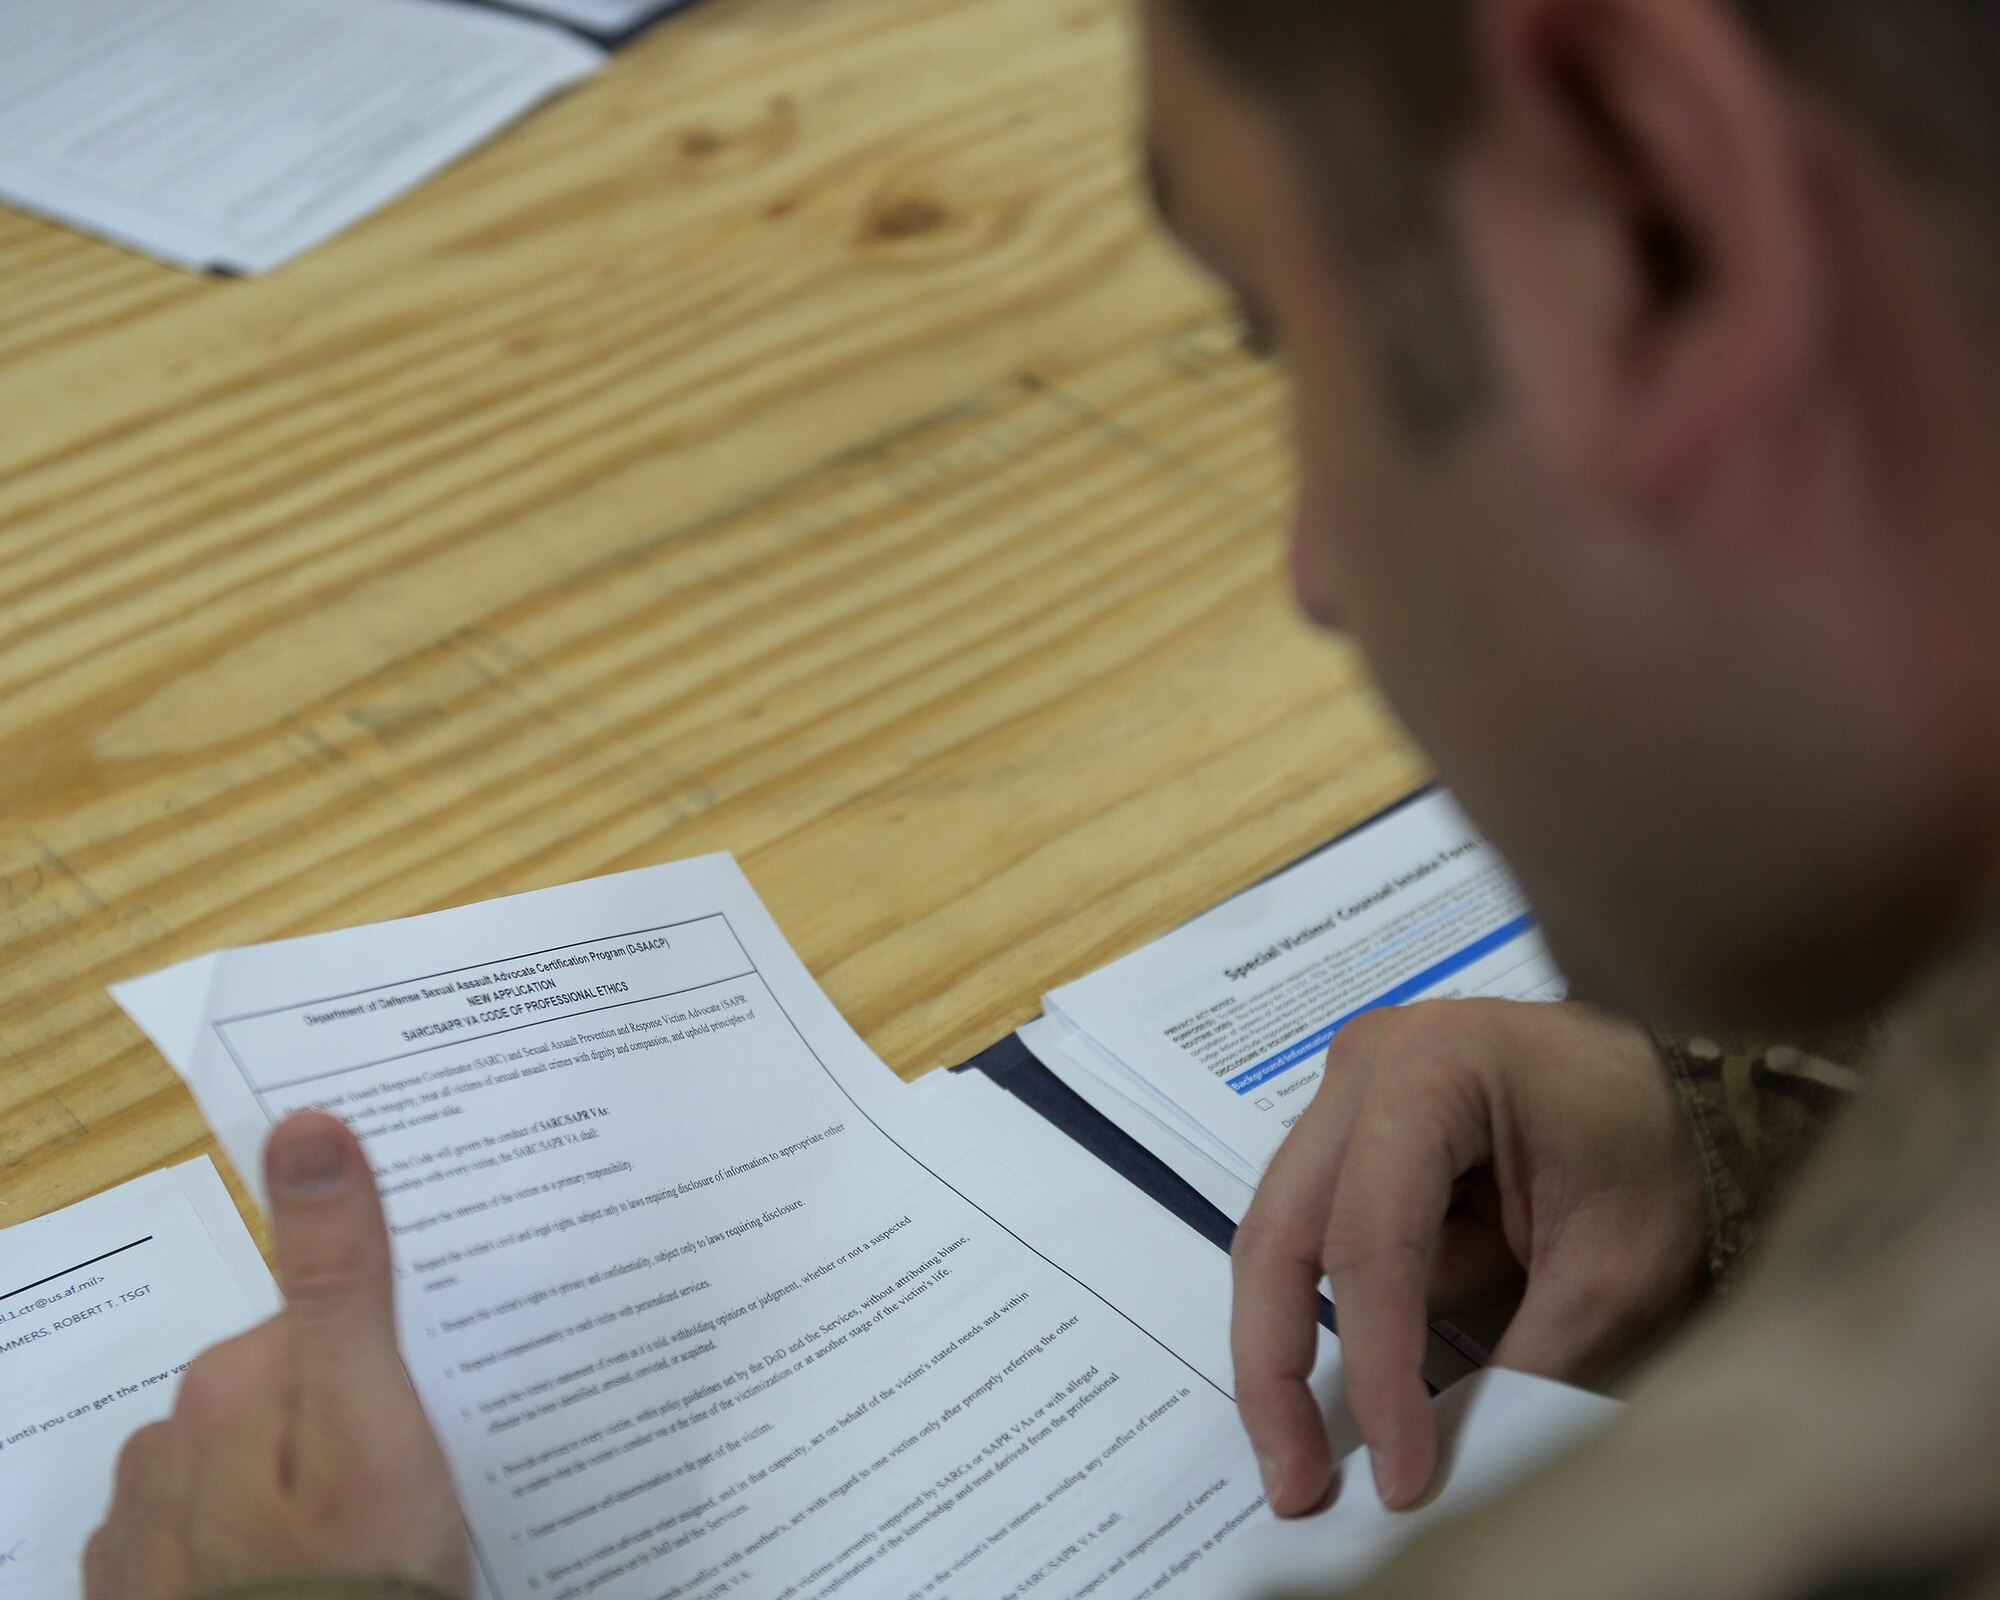 Tech. Sgt. Robert Summers studies the Sexual Assault Prevention and Response Victim Advocate Code of Professional Ethics while participating in training at an undisclosed location, East Africa, July 13, 2017. The guidelines help govern the actions of victim advocates to ensure the most professional assistance is given to victims of sexual assault. (U.S. Air Force photo by Senior Airman Jimmie D. Pike)